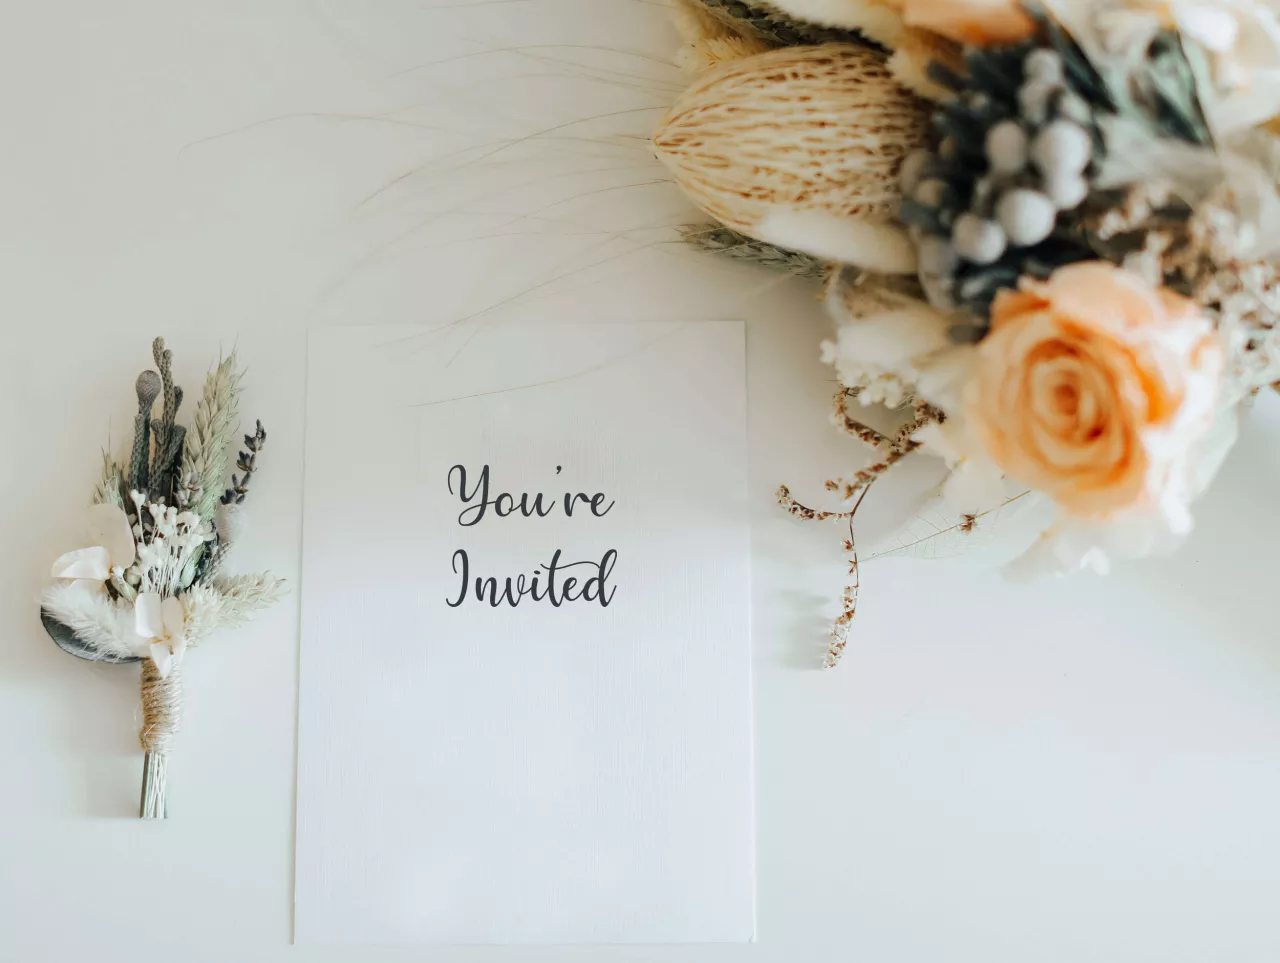 Homemade wedding invitation with colorful flowers beside it